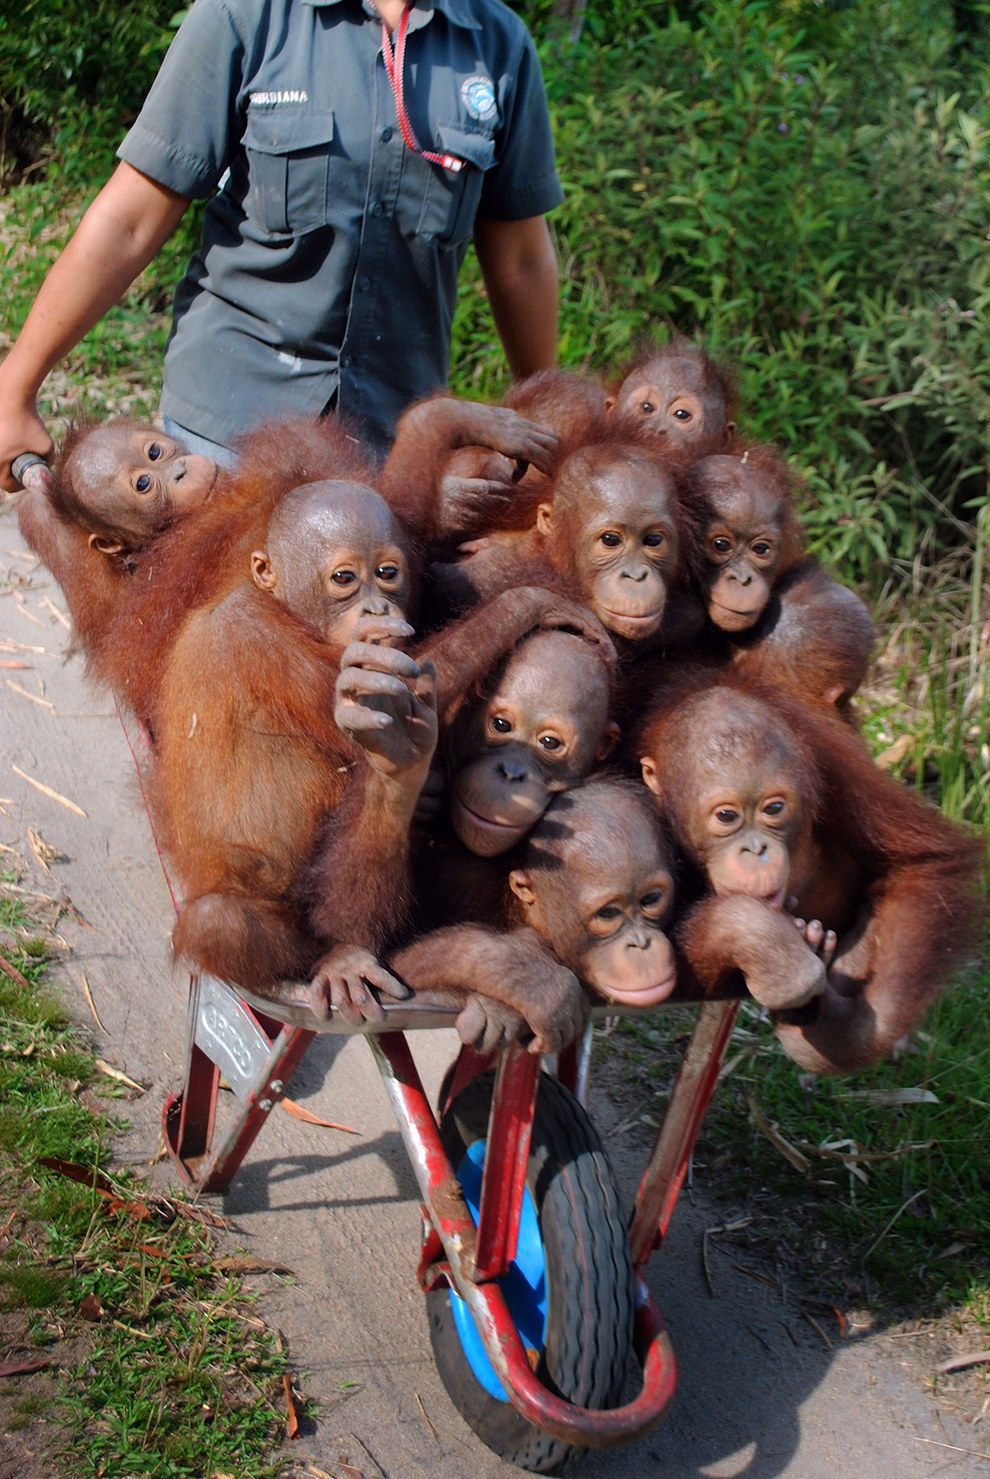 The pictures come from staff at International Animal Rescue at their rehabilitation centre in Ketapang, Borneo.